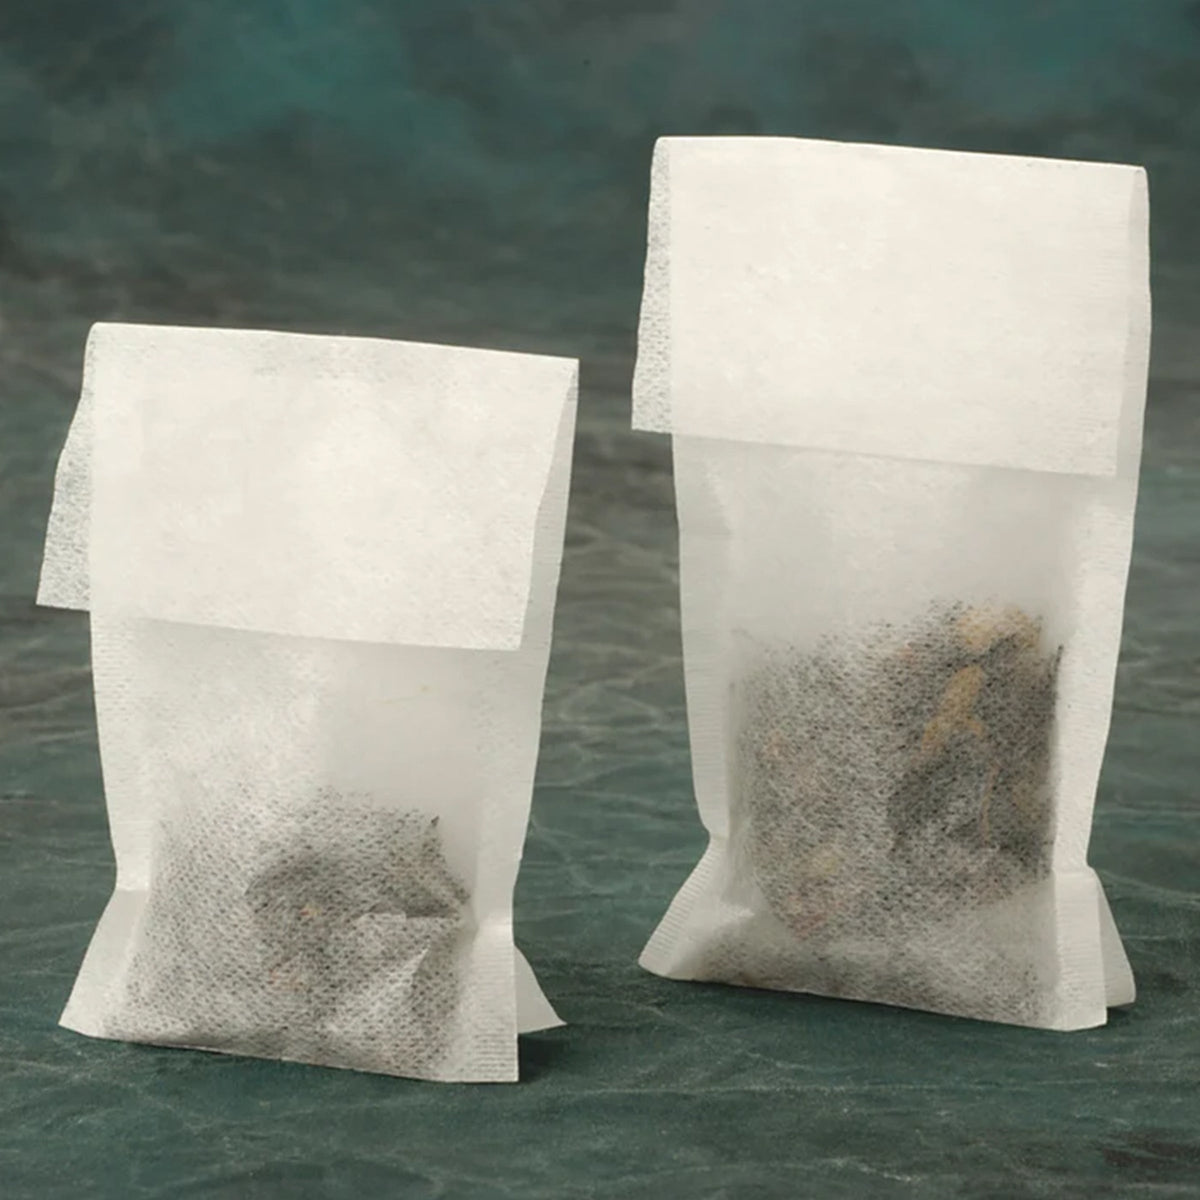 Two bags of RSVP International Small Tea Filters sitting on top of each other, ready for brewing.